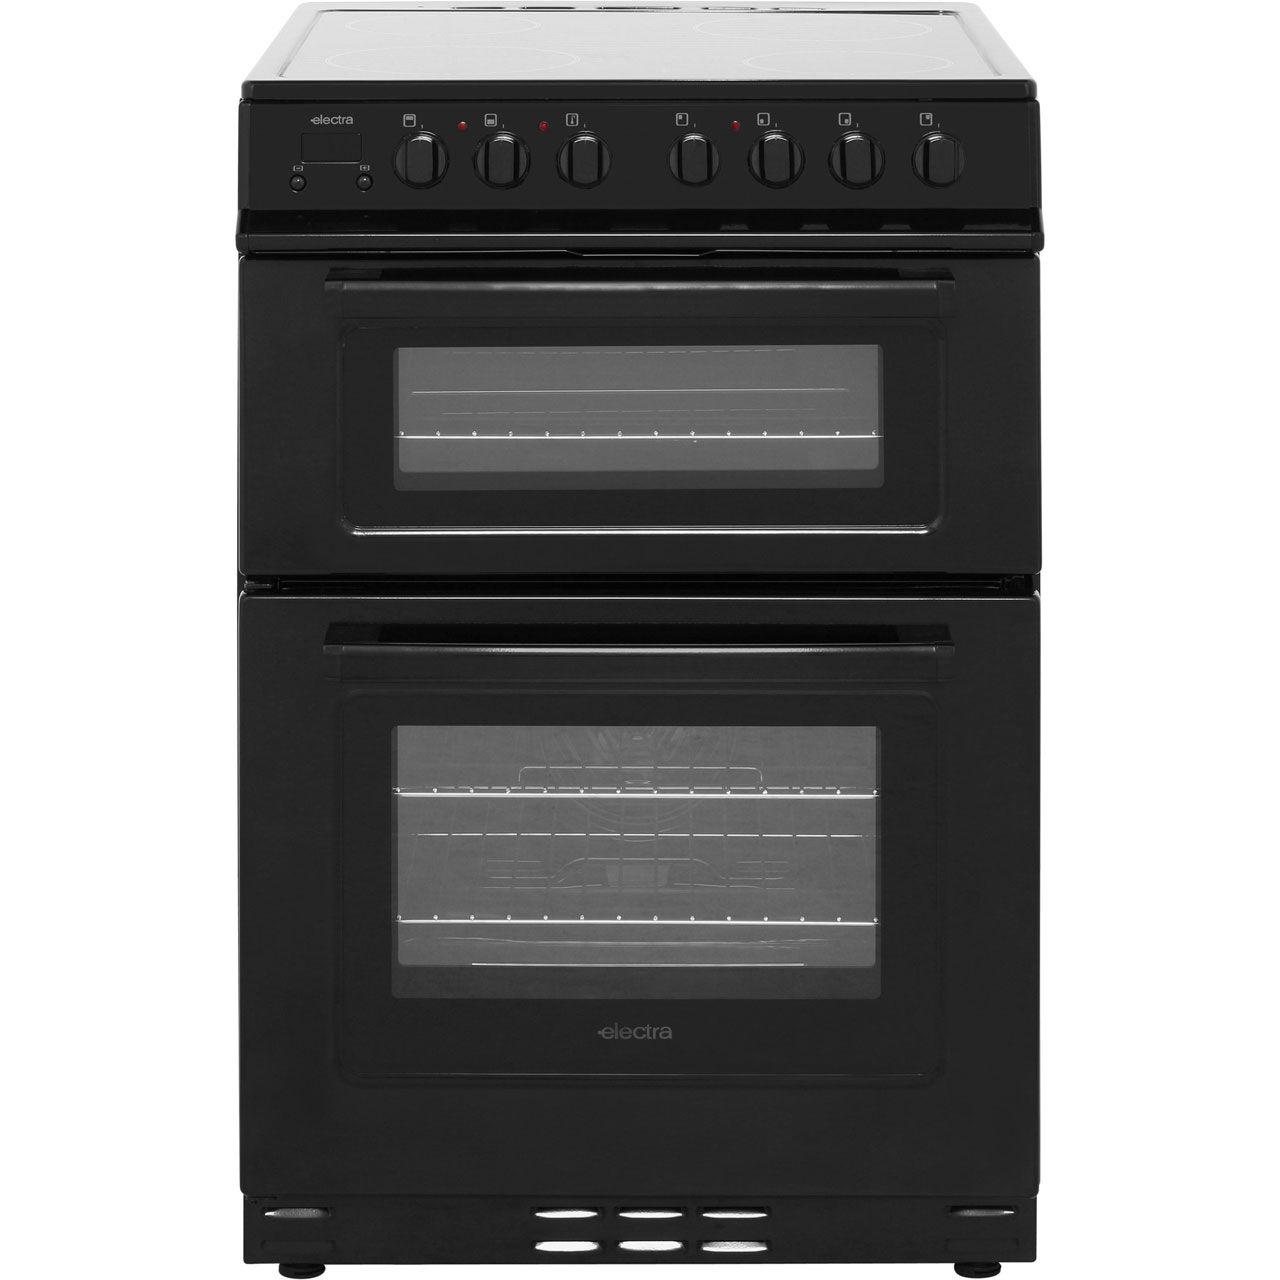 Electra TCR60B 60cm Electric Cooker with Ceramic Hob Review